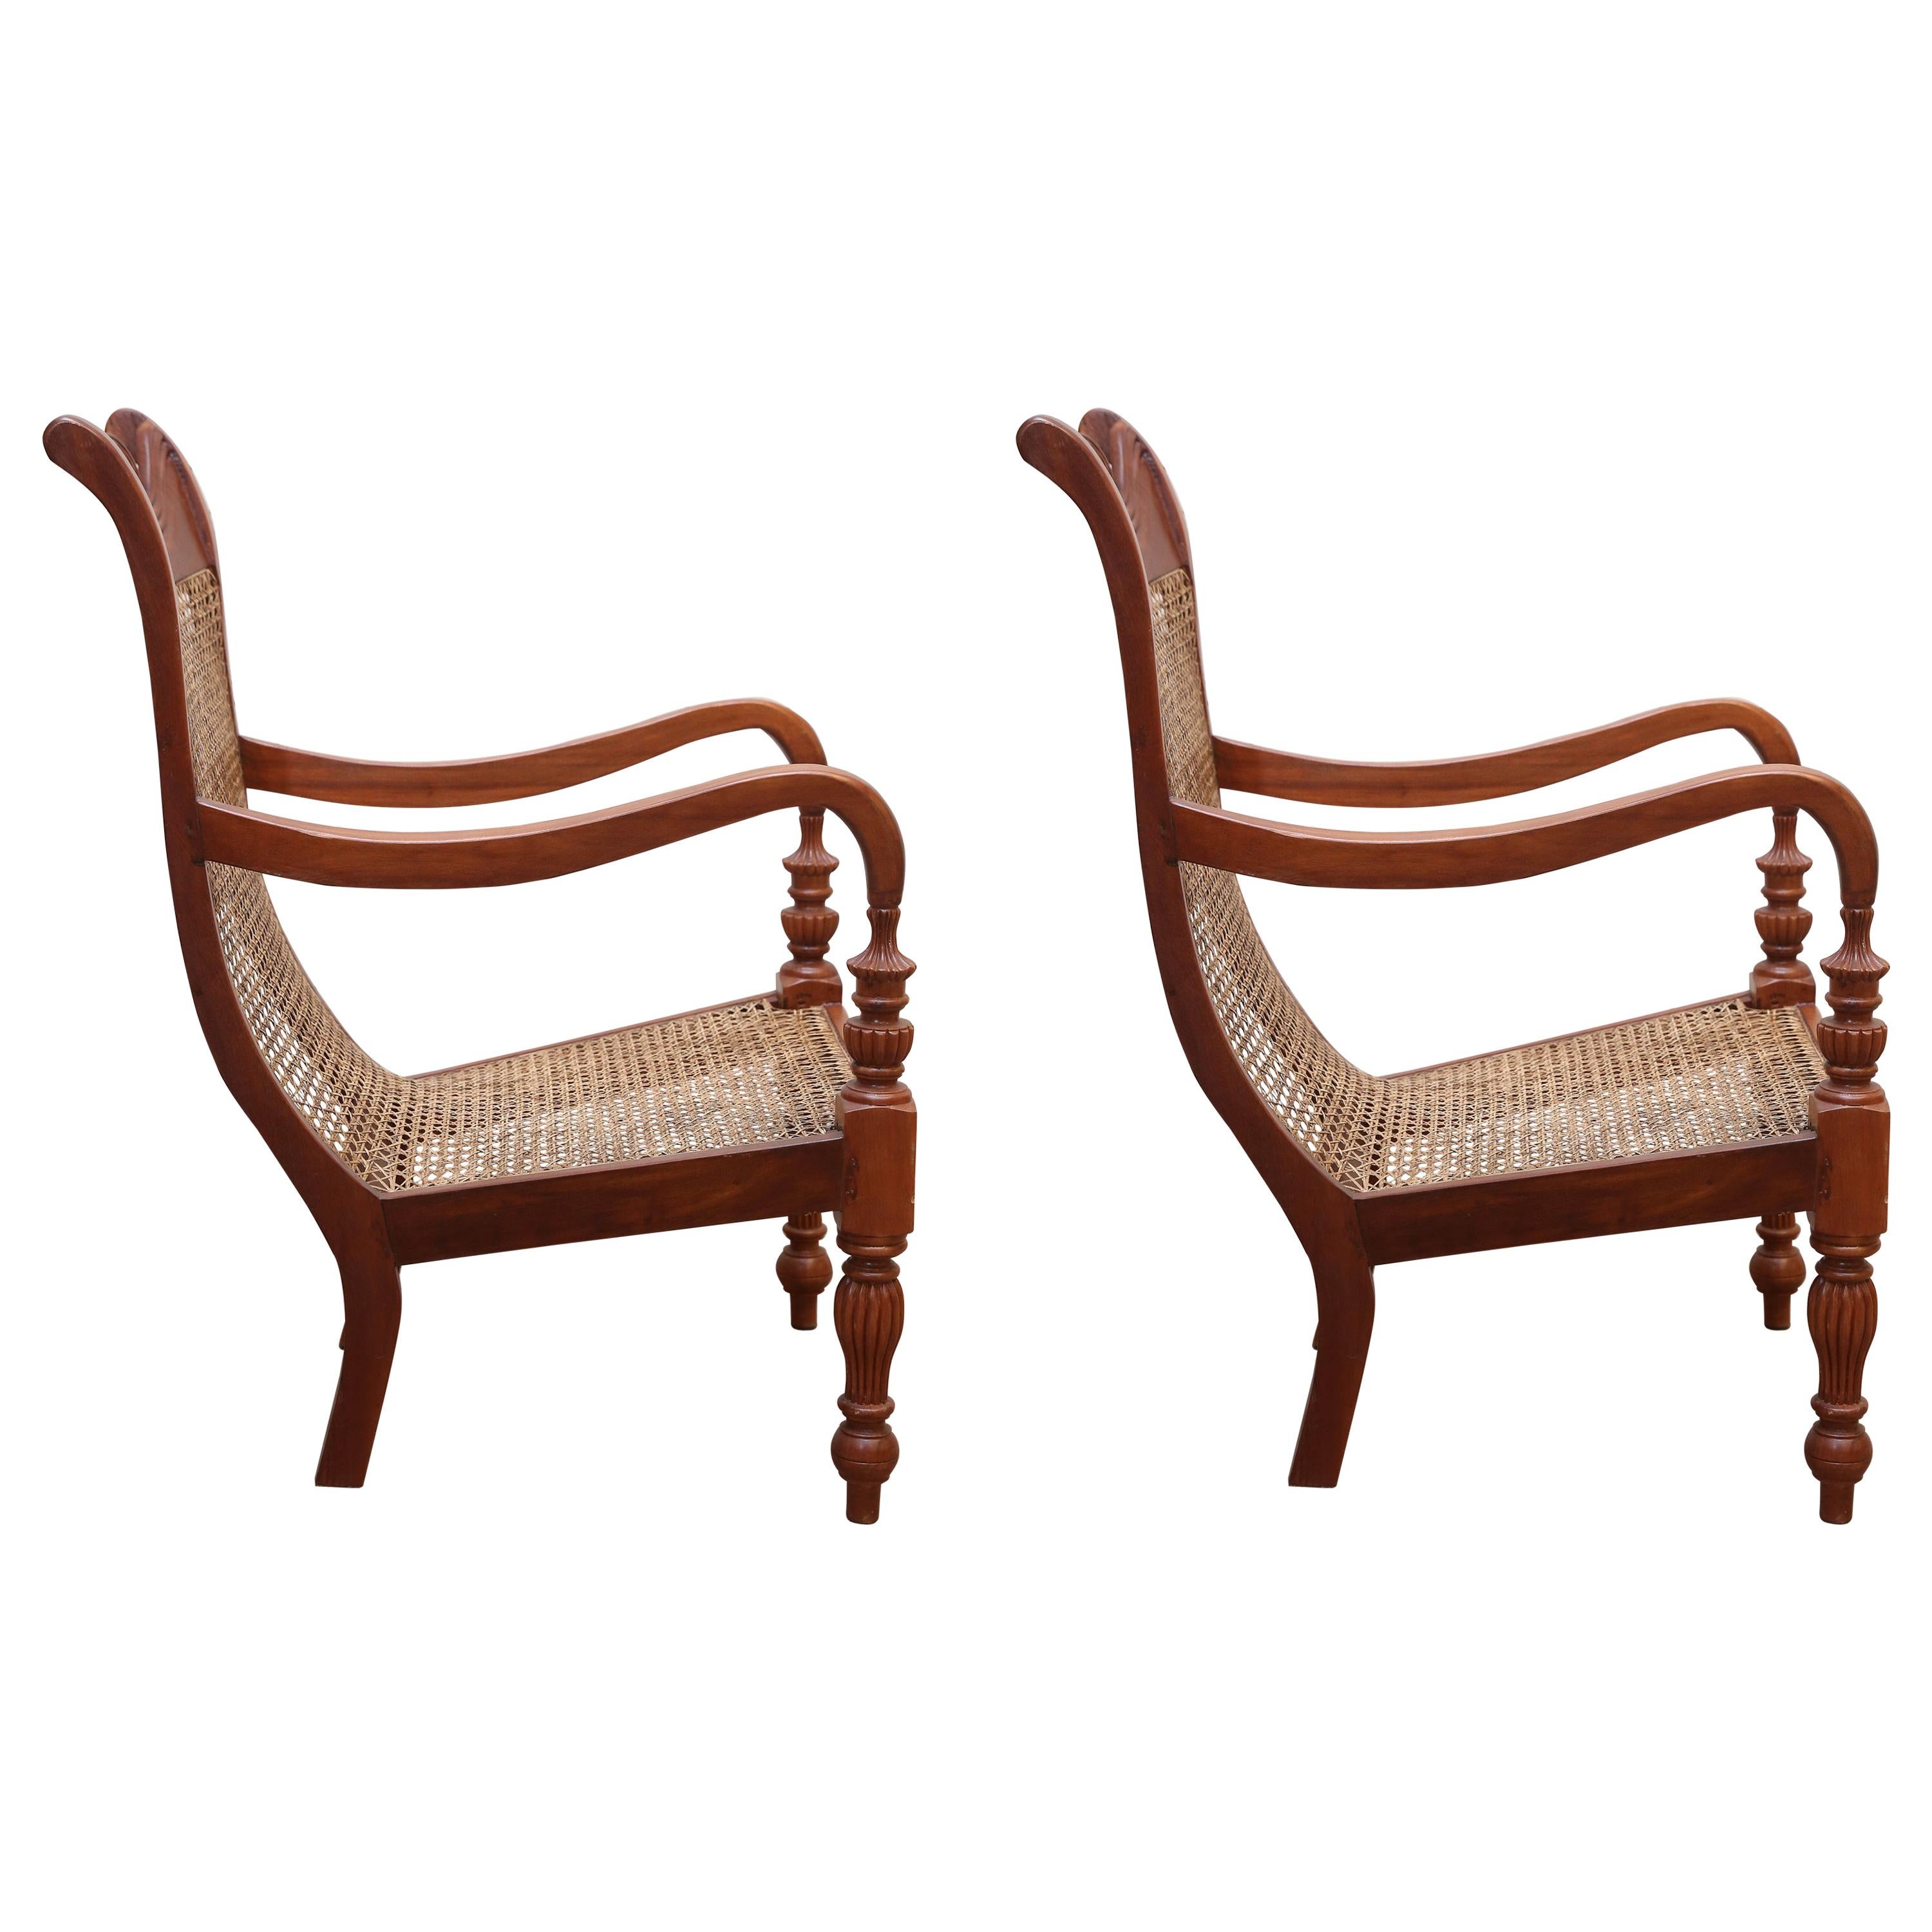 Set of Two Teak Wood and Cane Lounge Chairs from Colombo Area of Sri Lanka For Sale